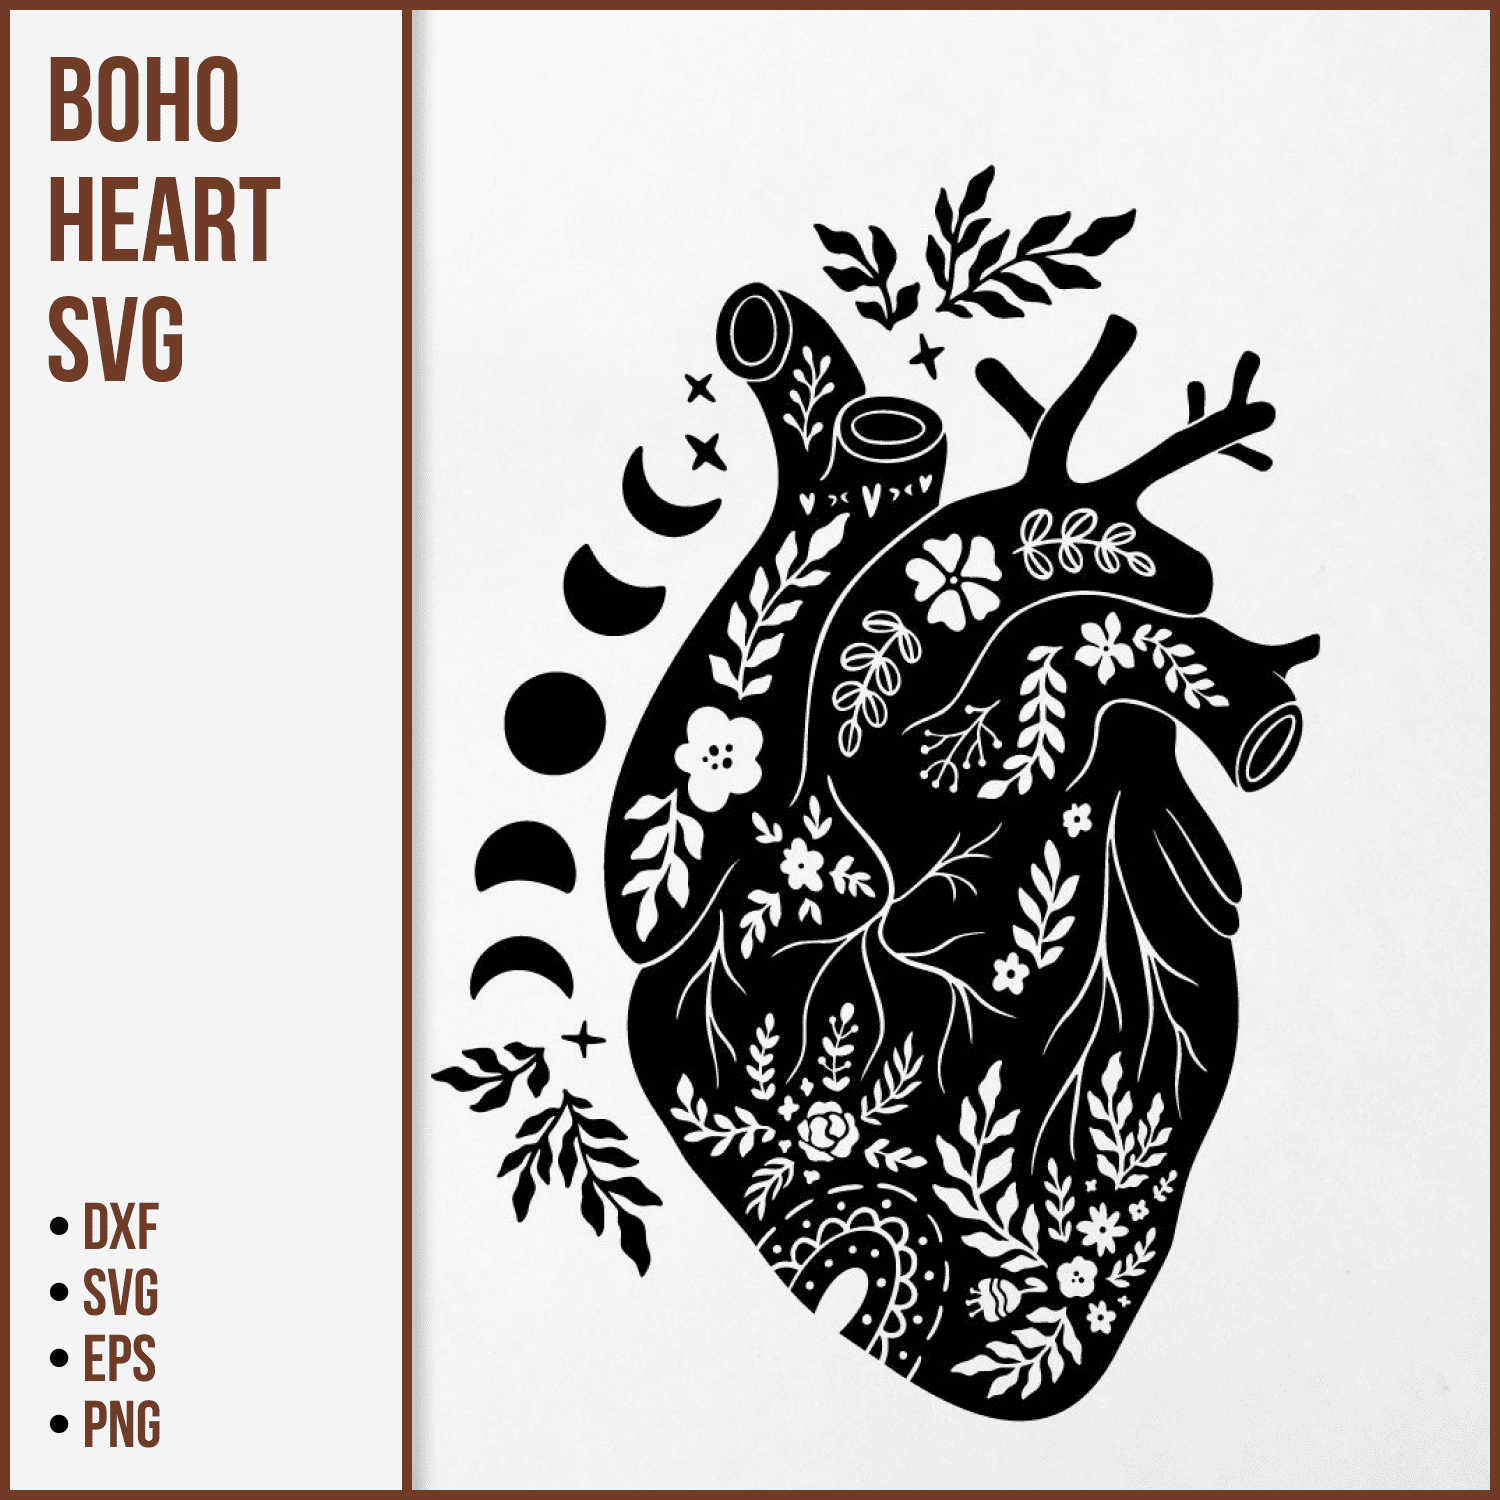 Boho Heart SVG, Floral heart silhouette SVG, Moon phases SVG.